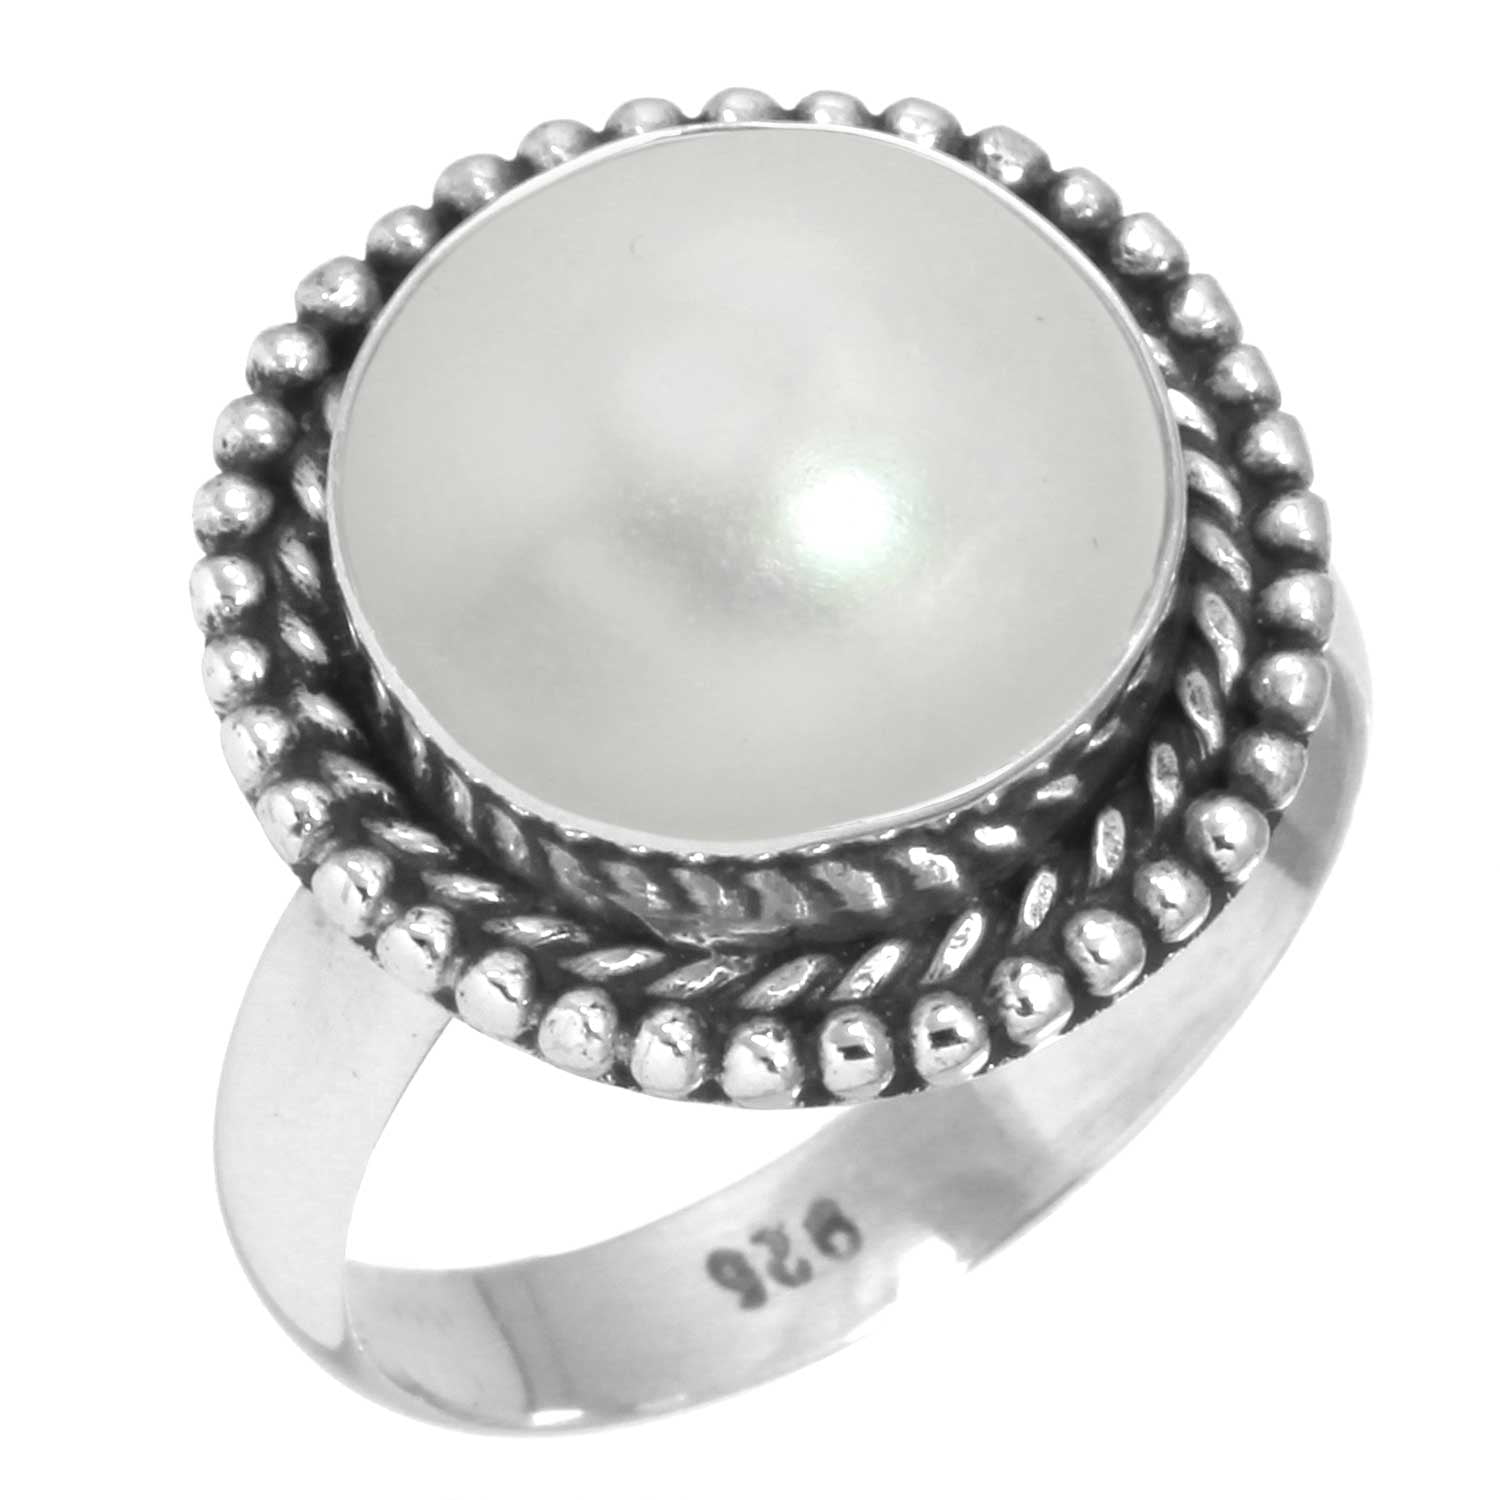 Jude Frances Petite Pearl Stone Ring With Pave White Diamonds | R Gregory  Jewelers